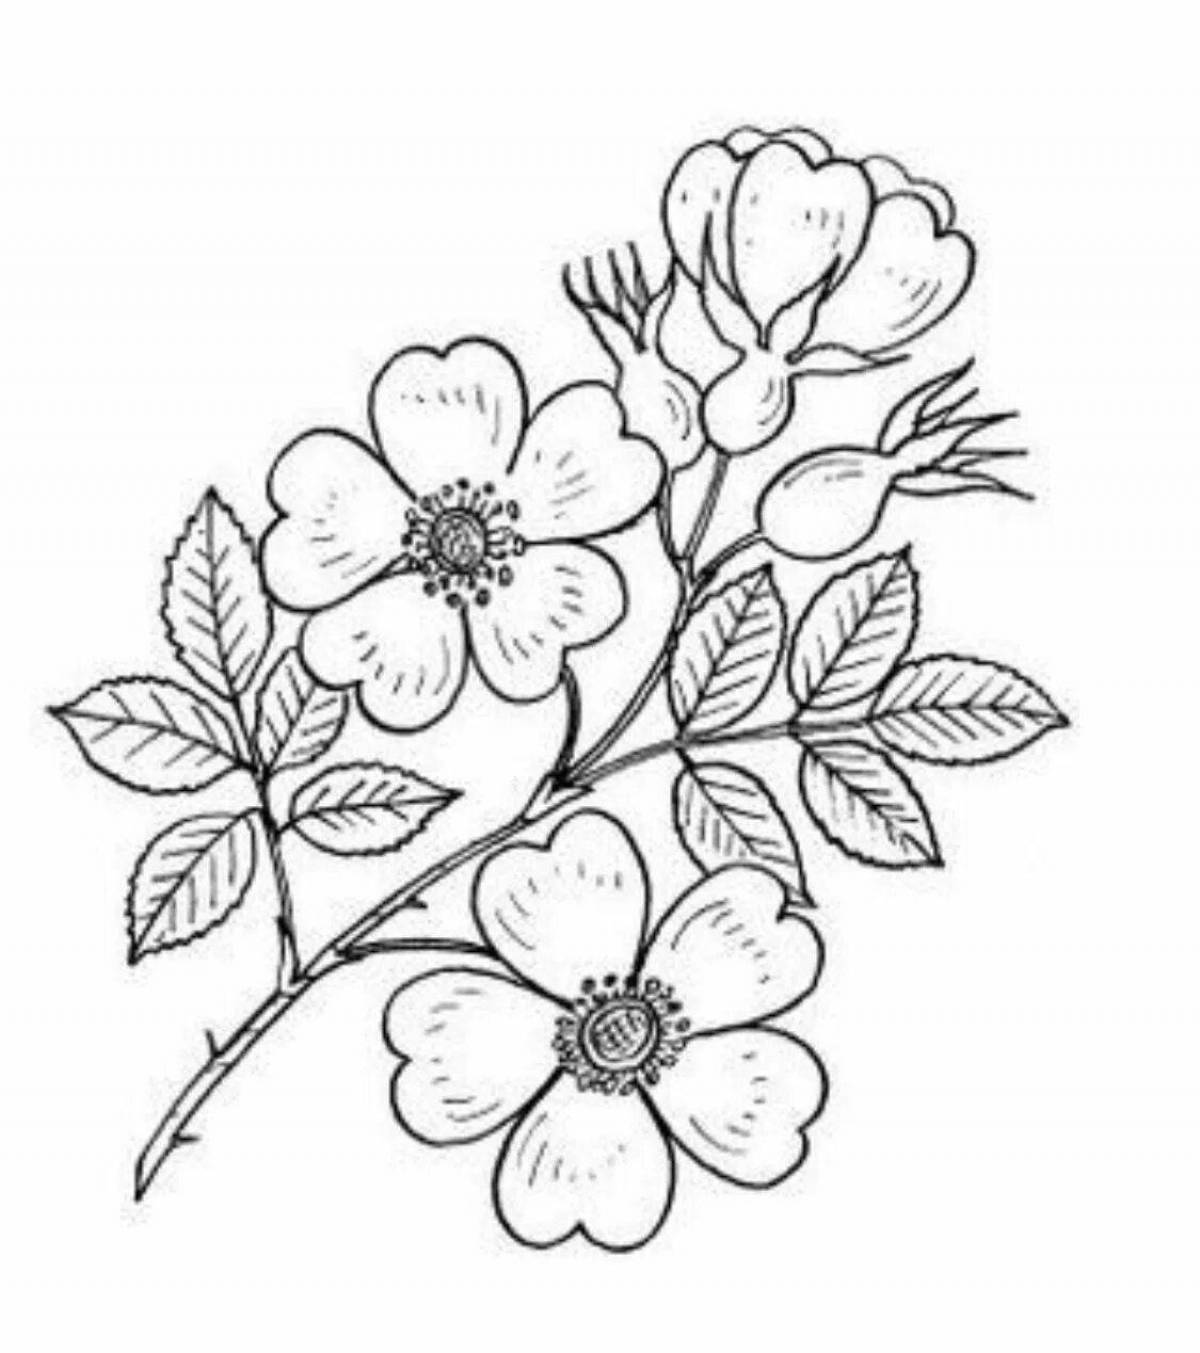 Colorful rosehip coloring page for kids